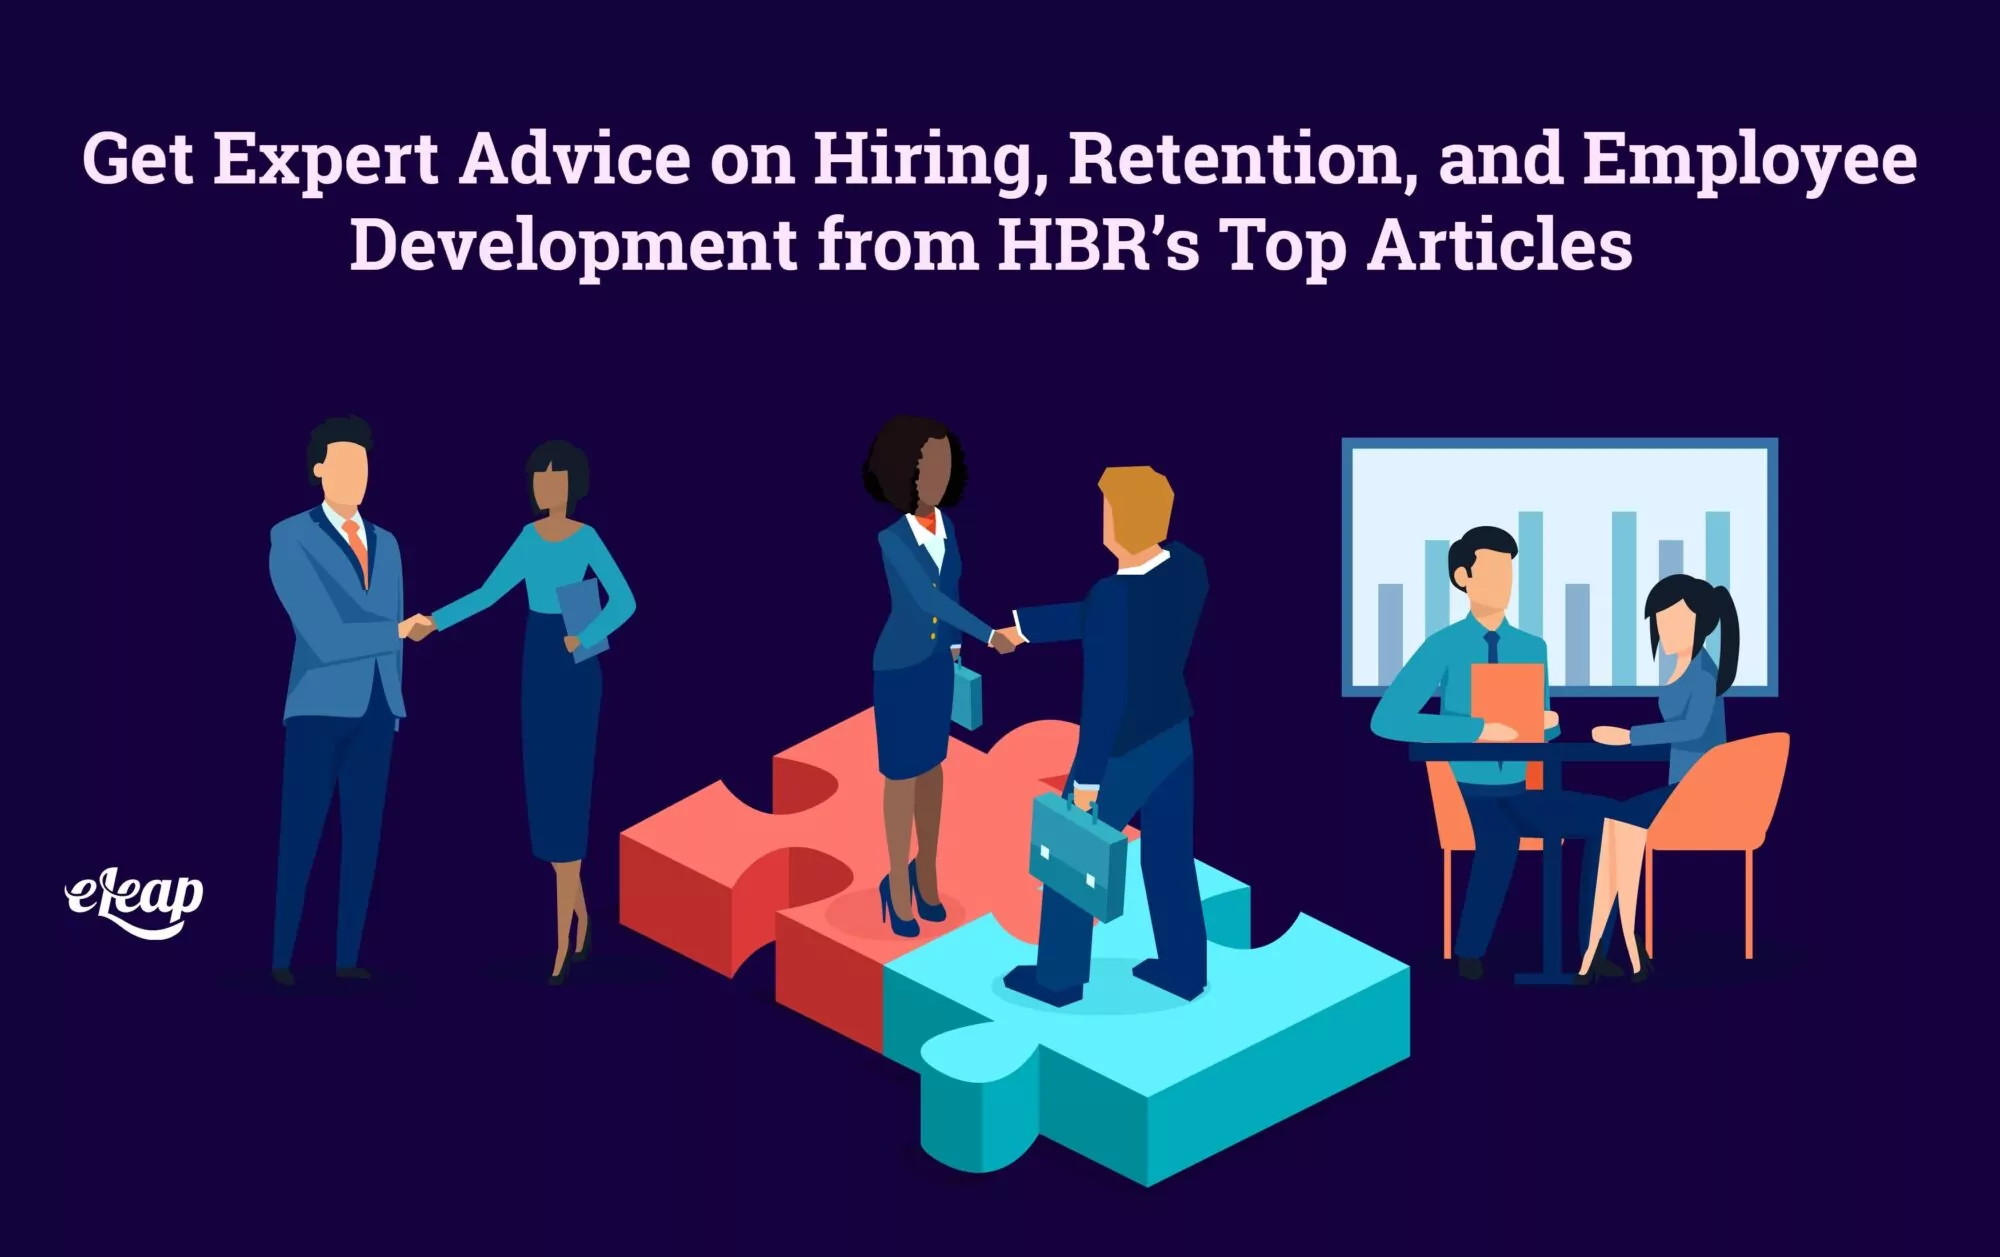 Get Expert Advice on Hiring, Retention, and Employee Development from HBR's Top Articles